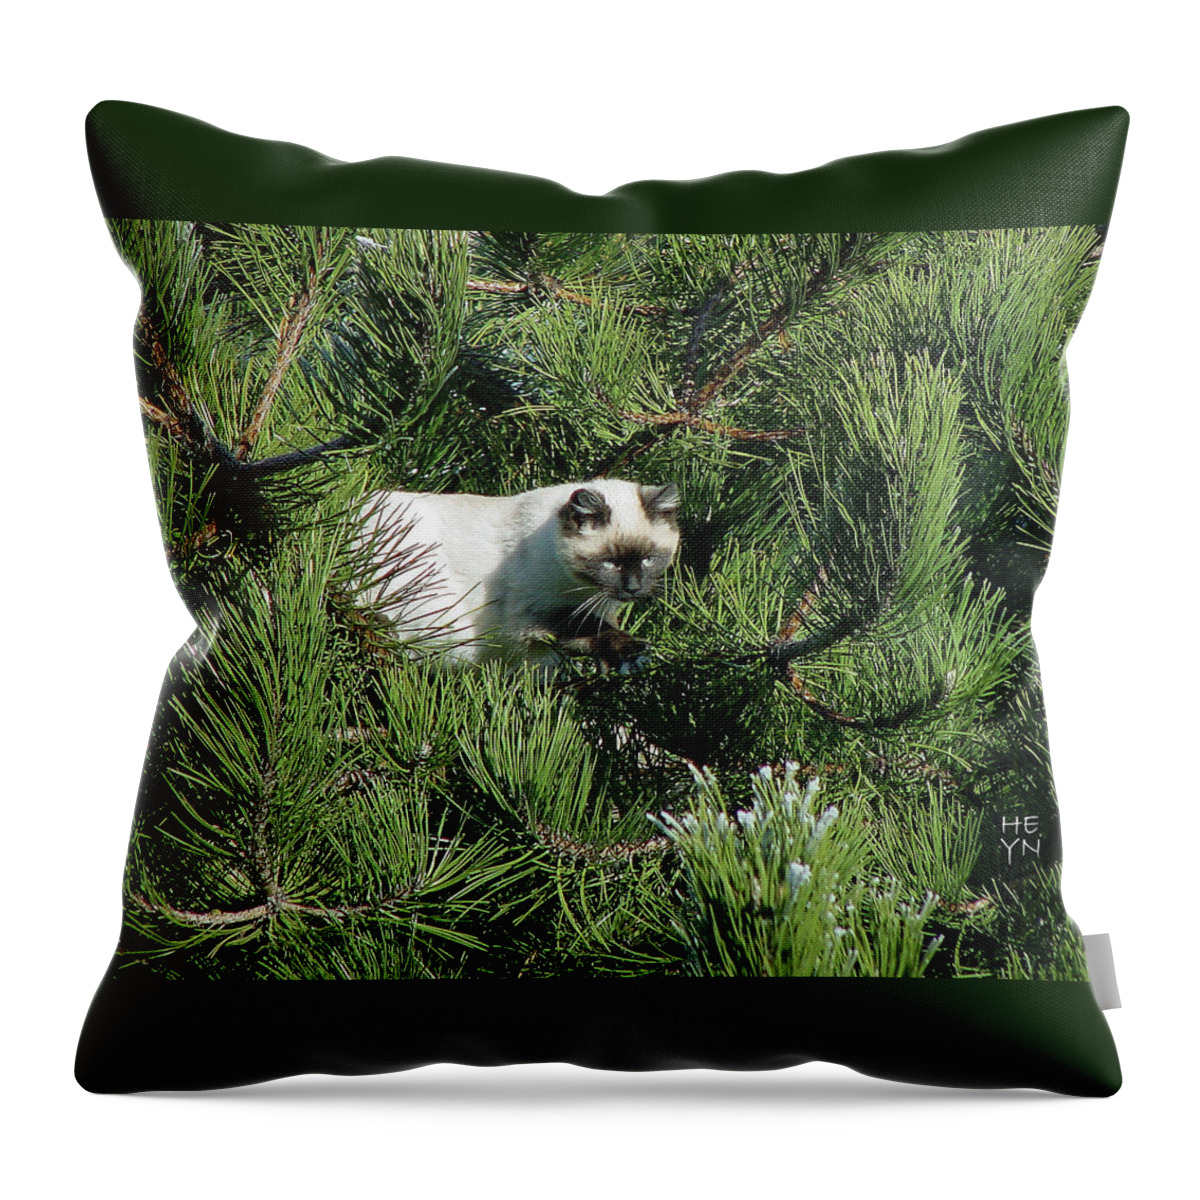 Green Throw Pillow featuring the photograph Tree Bandit by Shirley Heyn